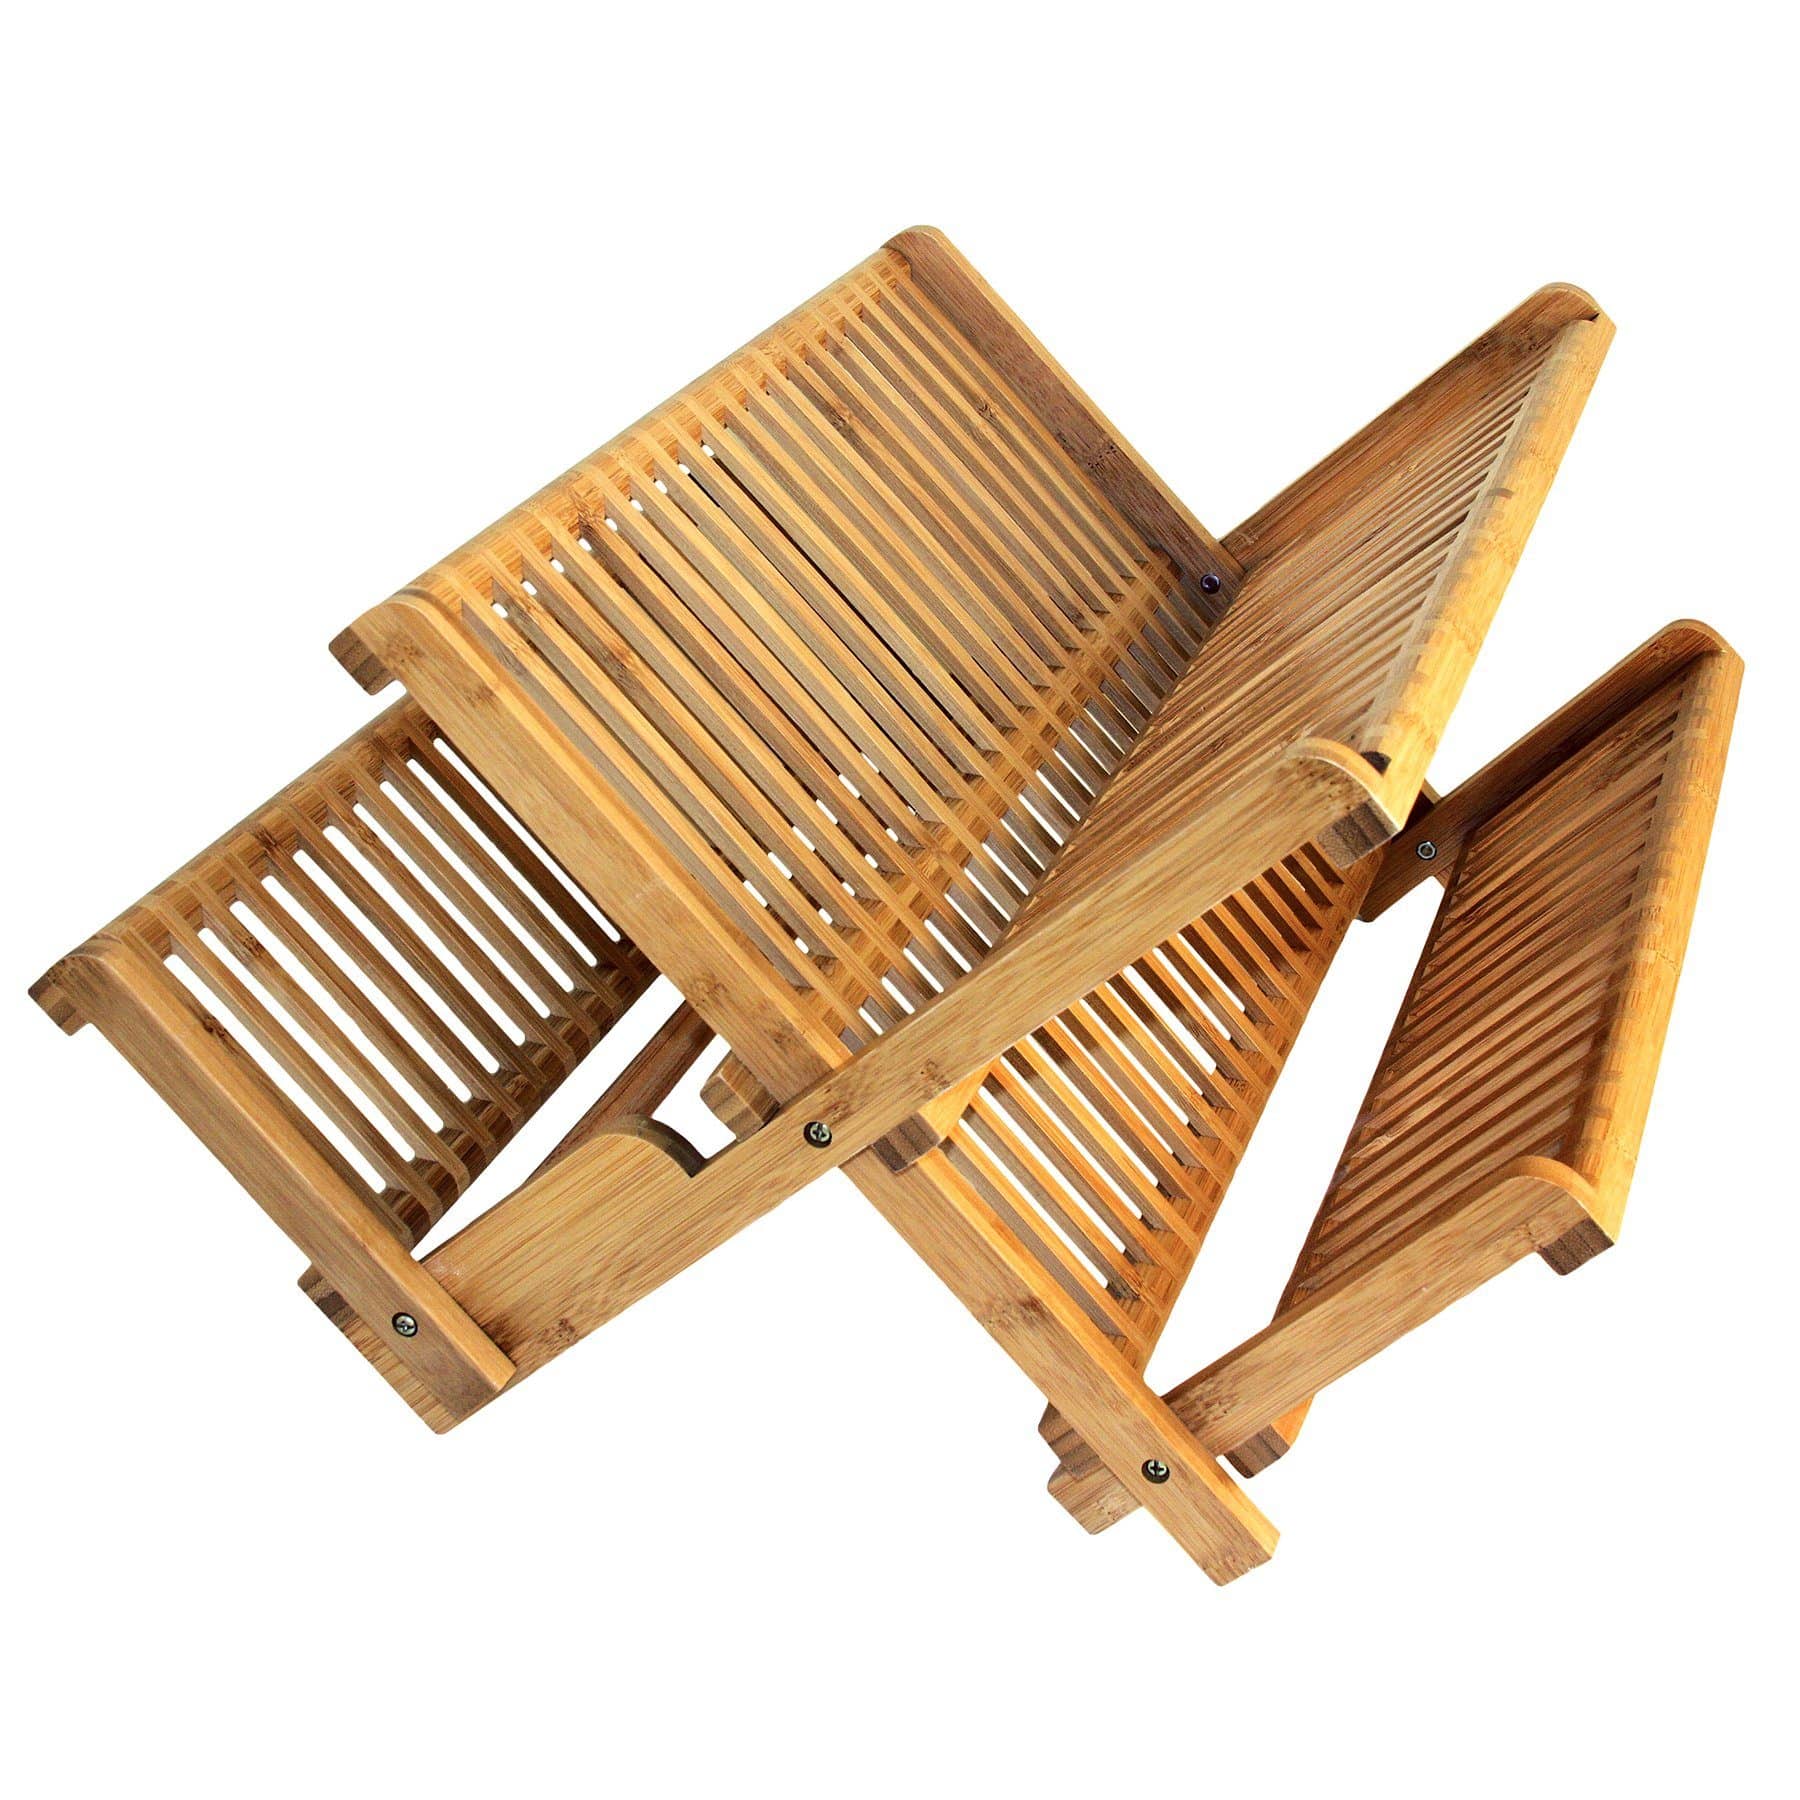 Collapsible Bamboo Dish Drying Rack – Totally Bamboo